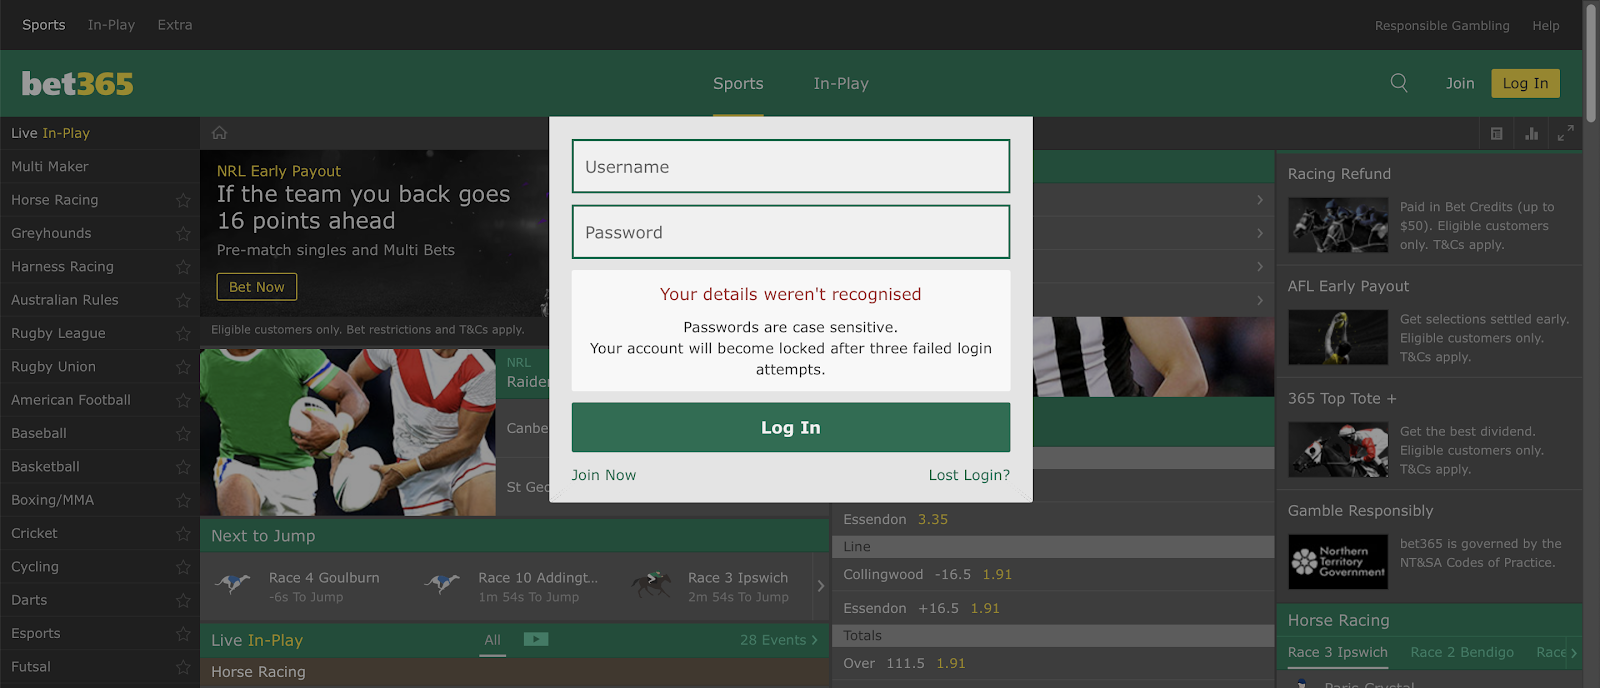 Bet365 Deleted Account